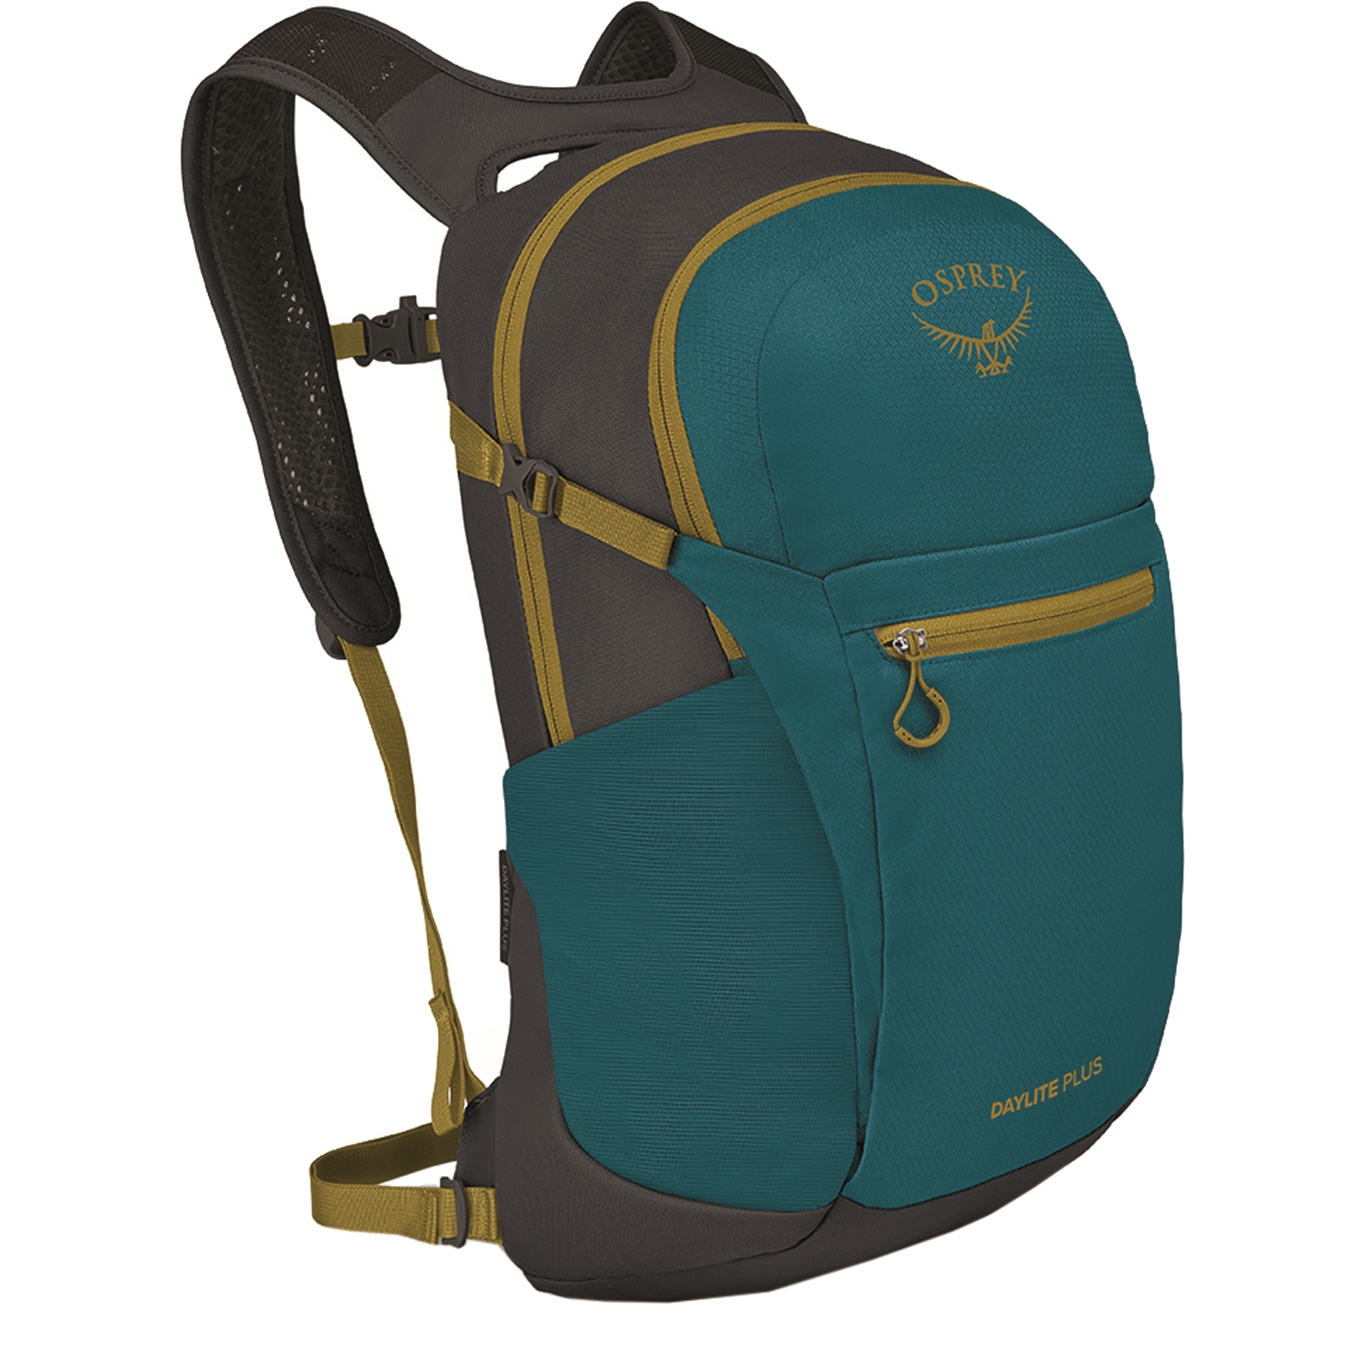 Osprey Daylite Plus deep peyto green/tunnel vision backpack